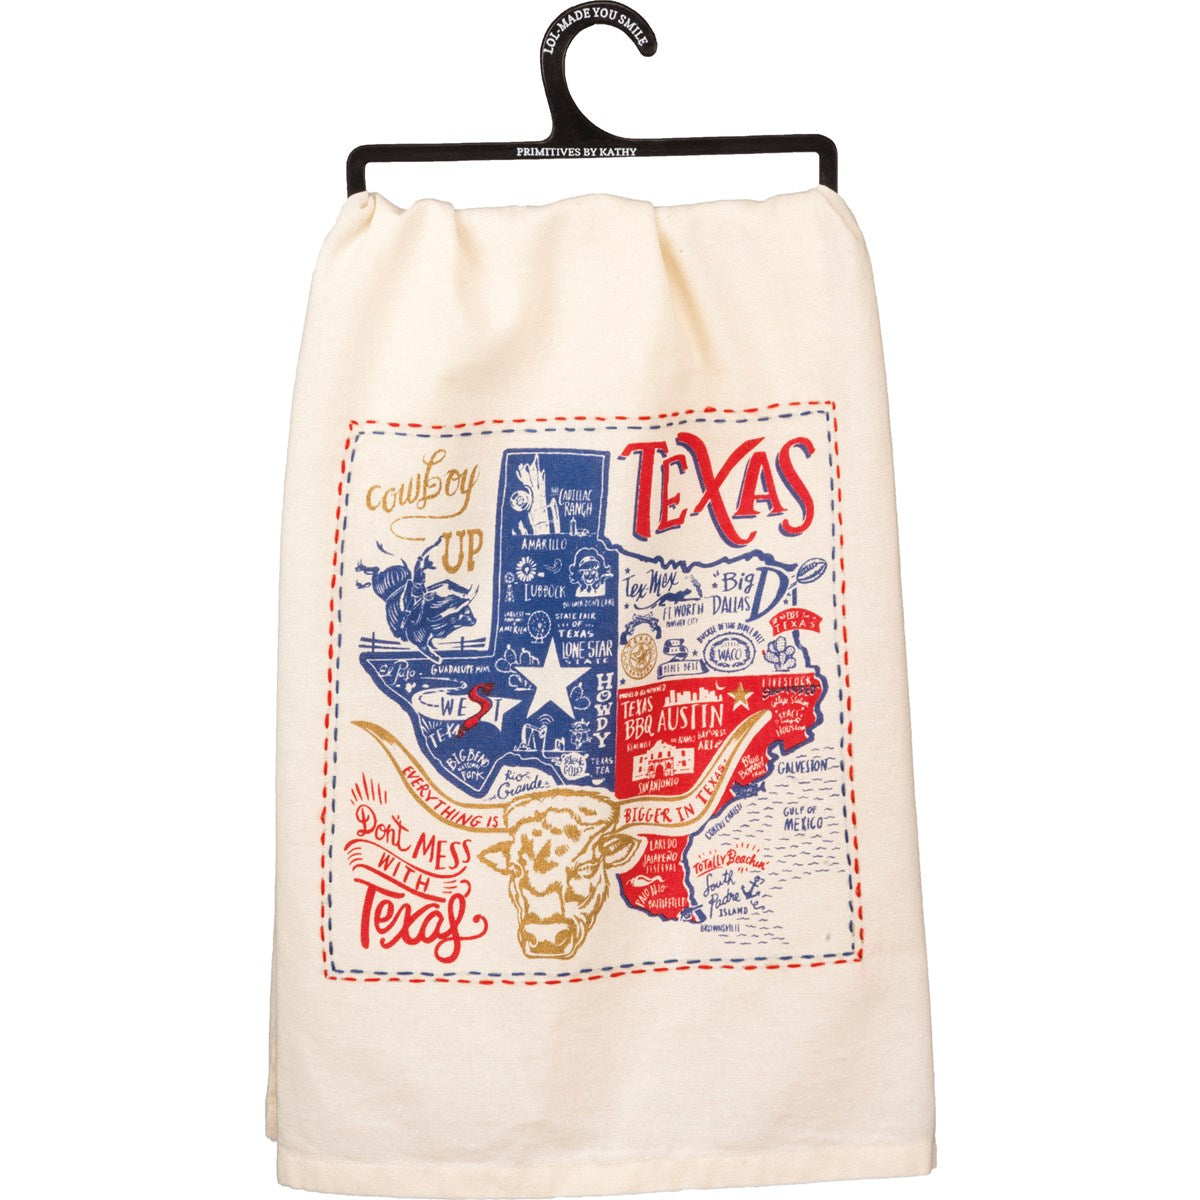 "TEXAS" EMBROIDERED DISH TOWEL